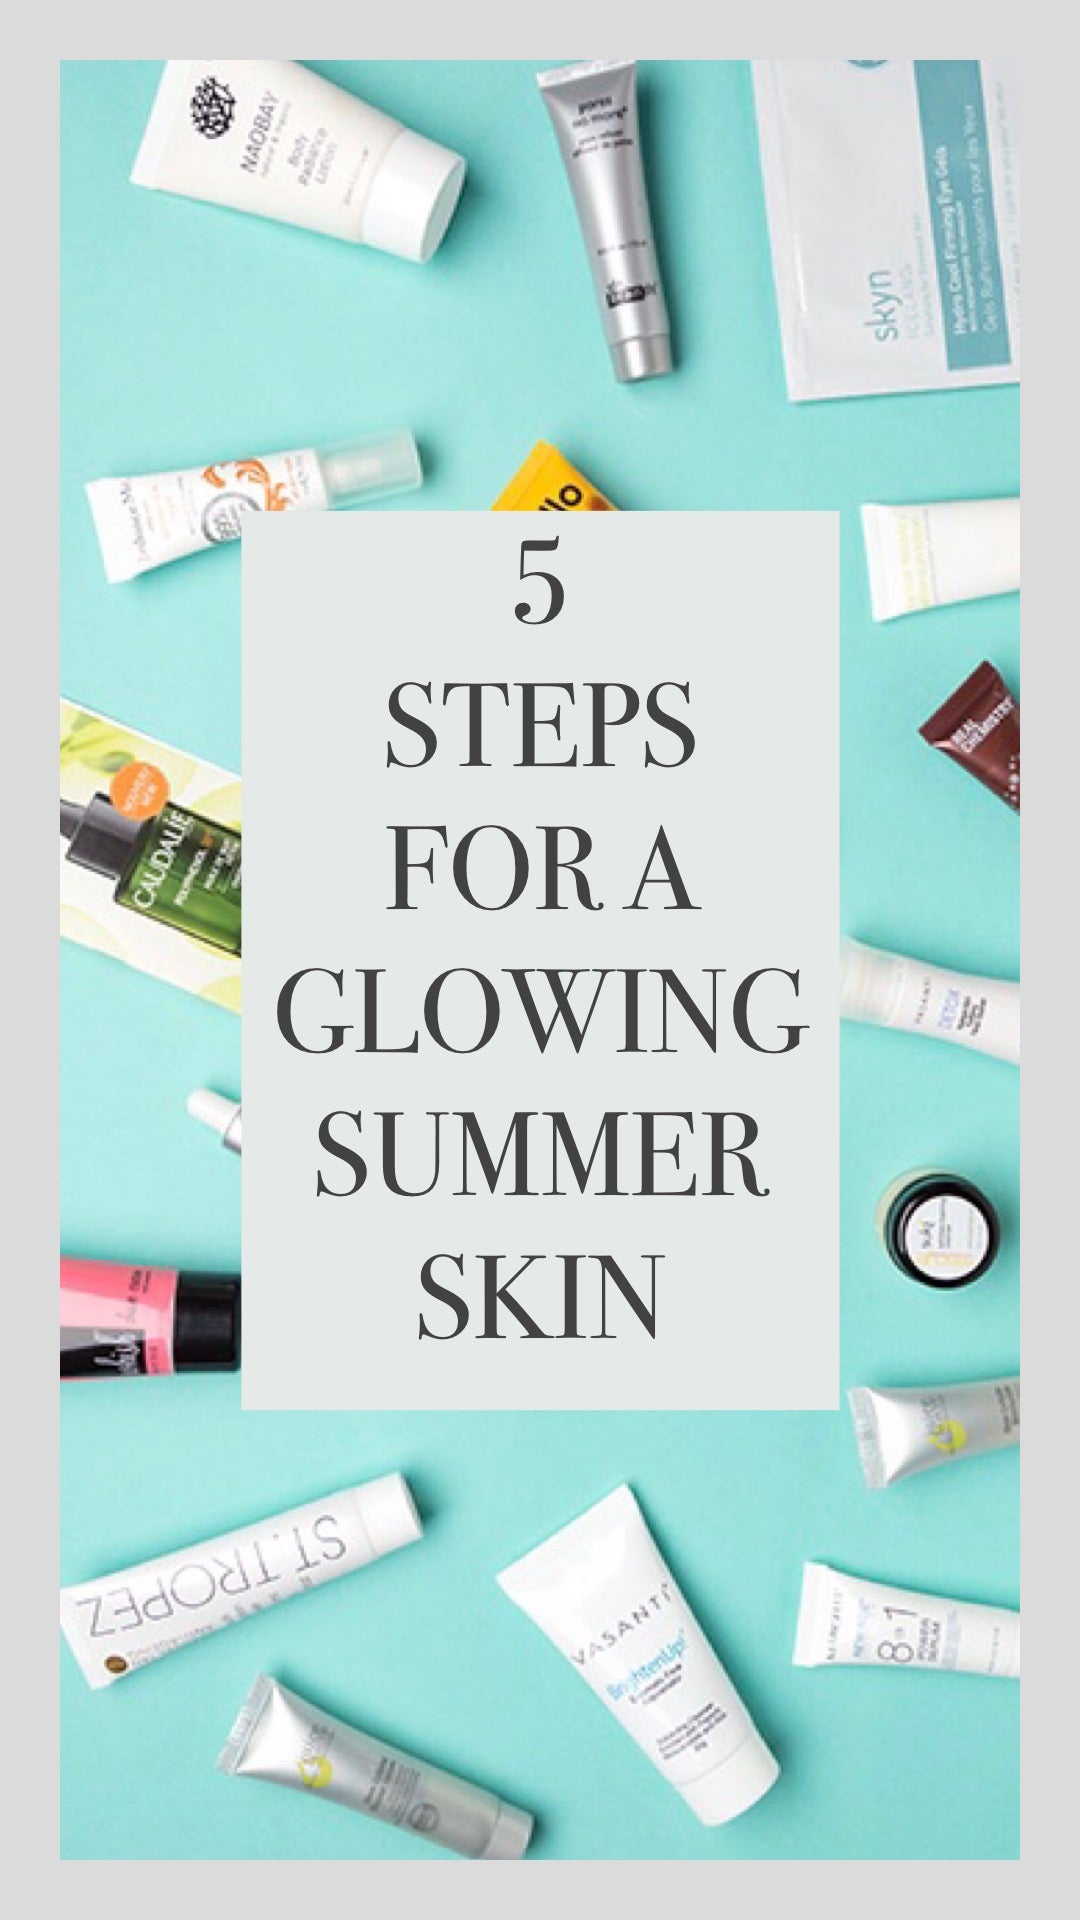 5 Steps for a Glowing Summer Skin